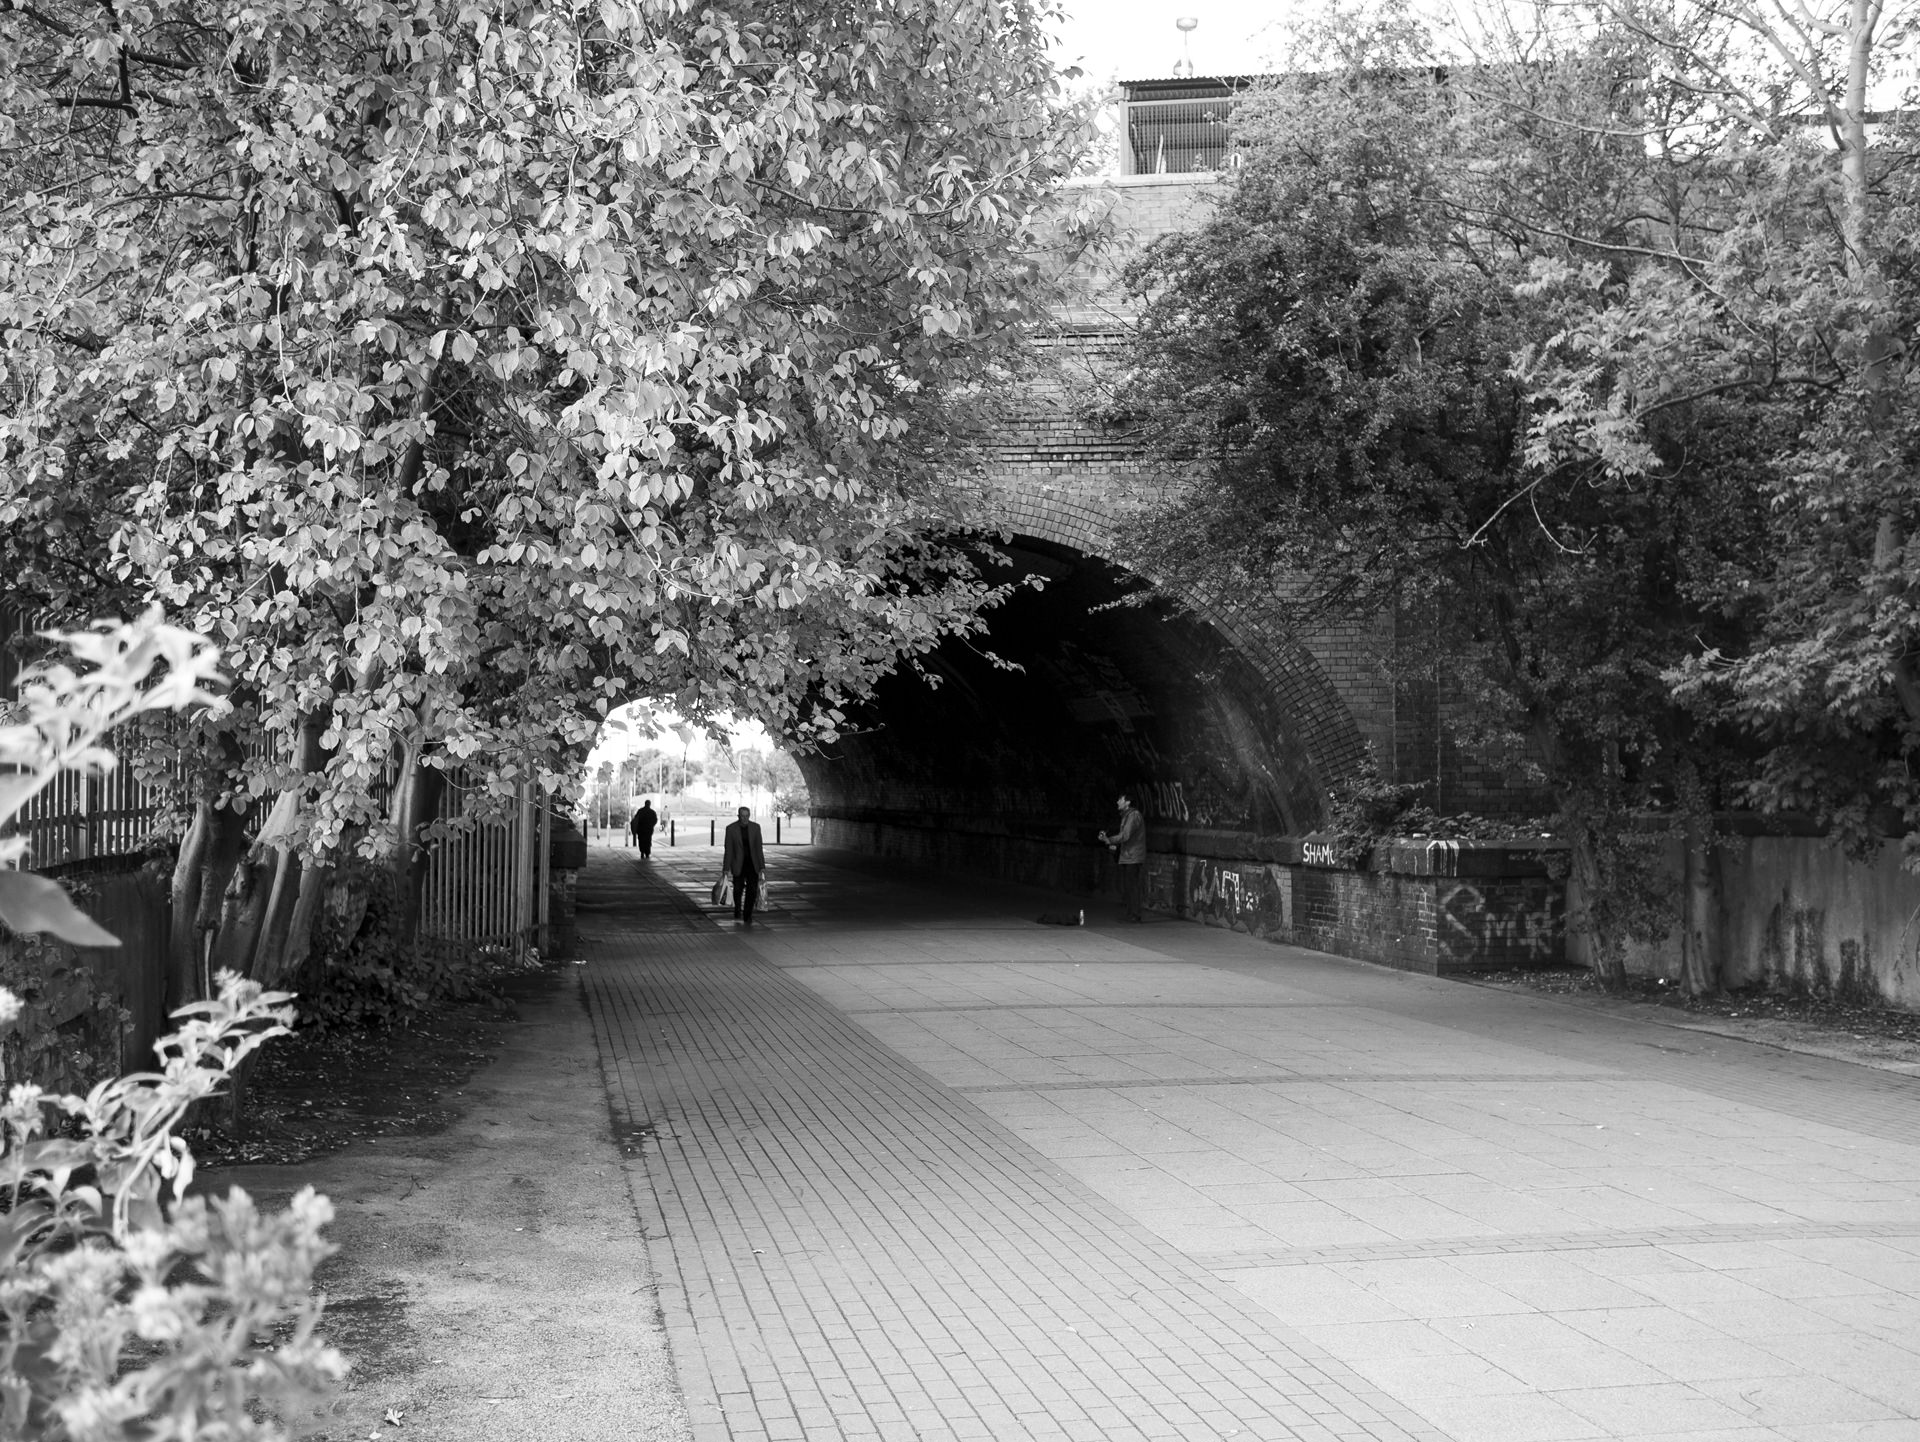 Looking through the Marsh Lane Time Tunnel, with trees overhanging and people walking through